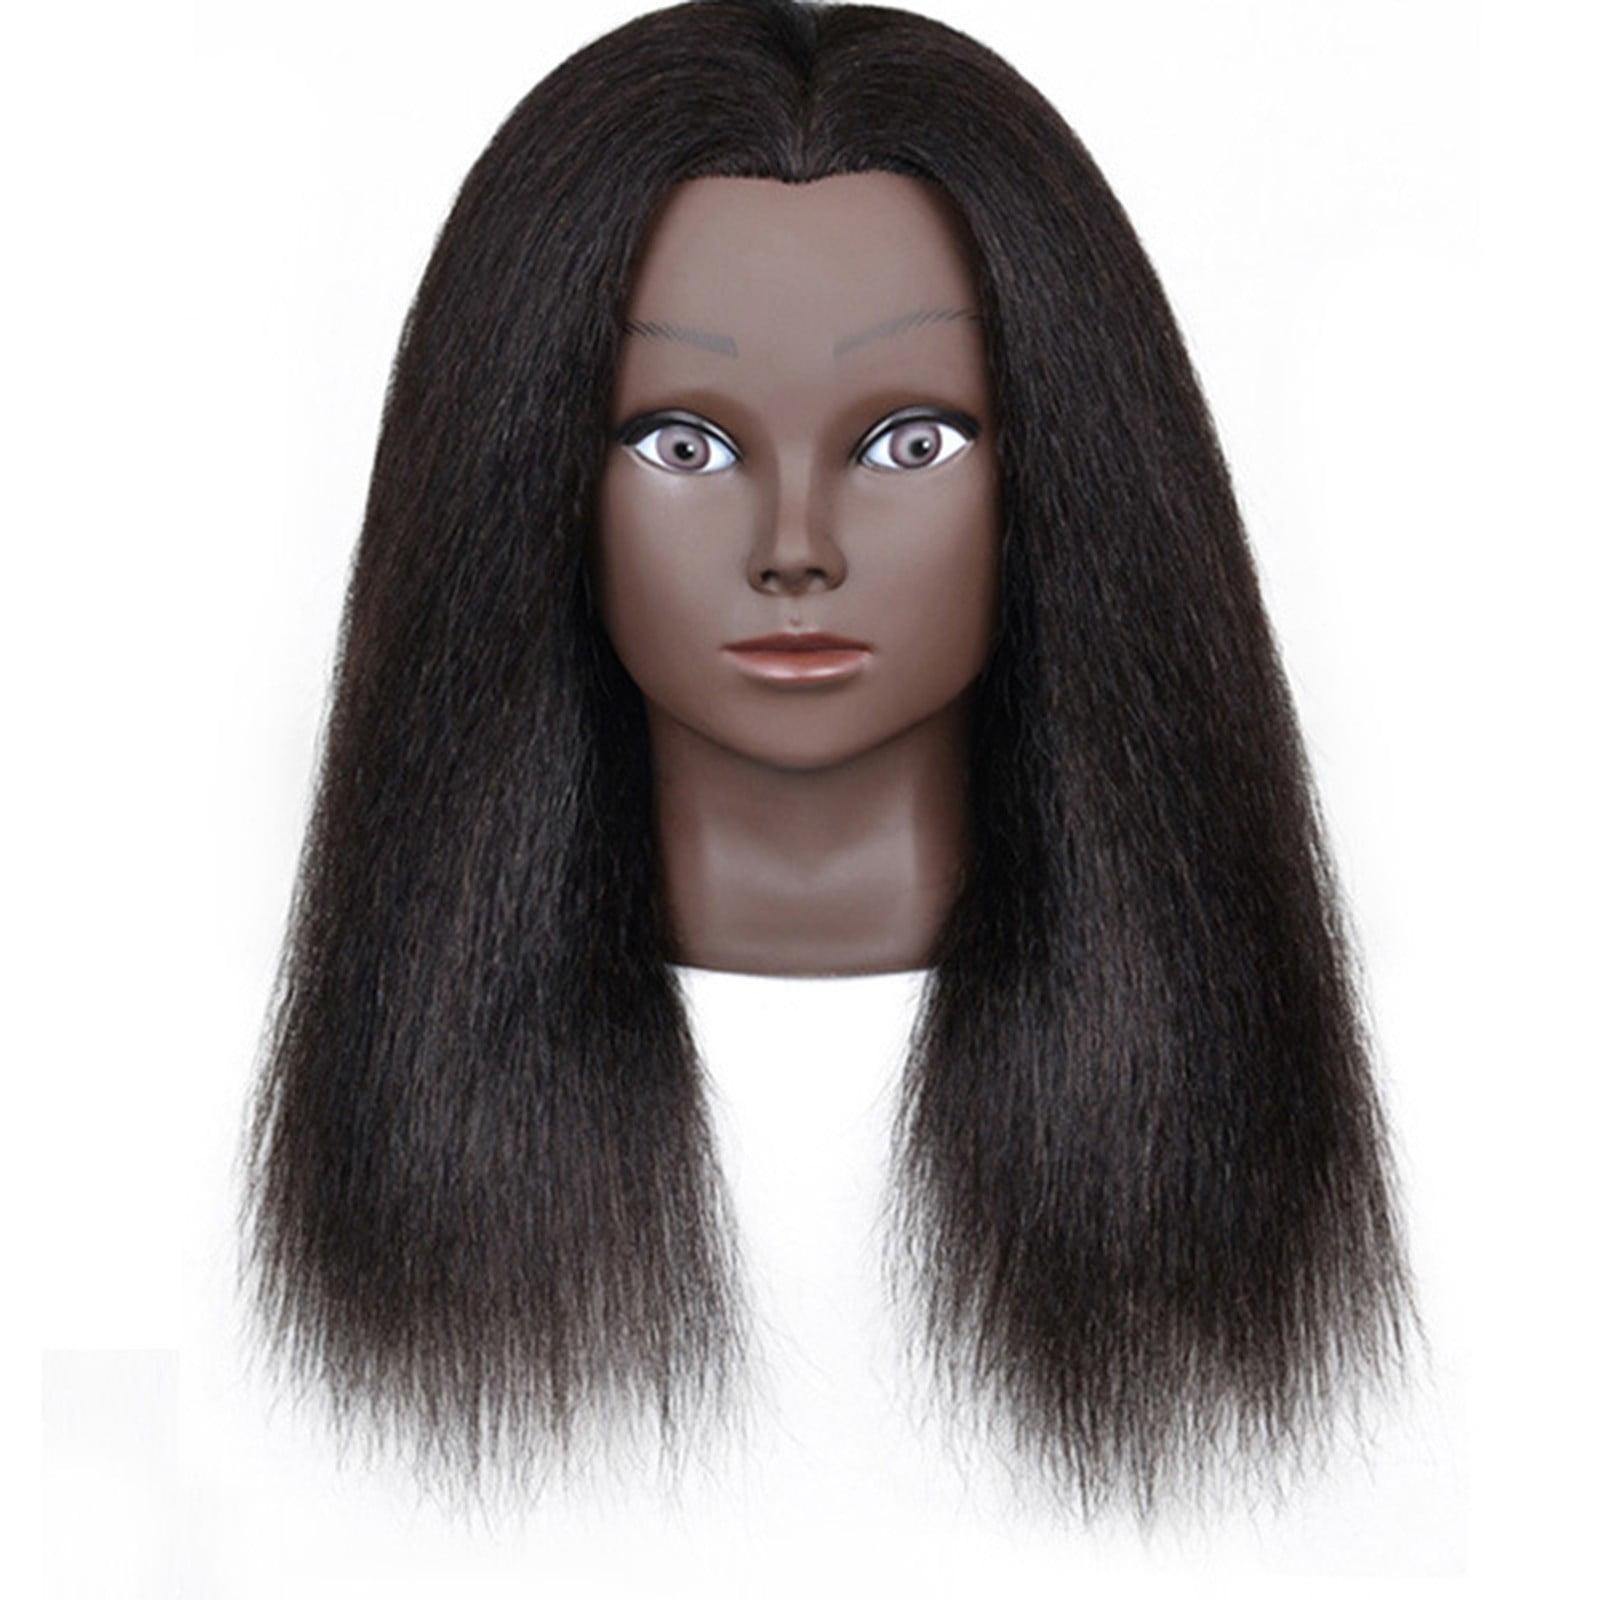 CZFY African American Mannequin Head with 100% Real Hair and